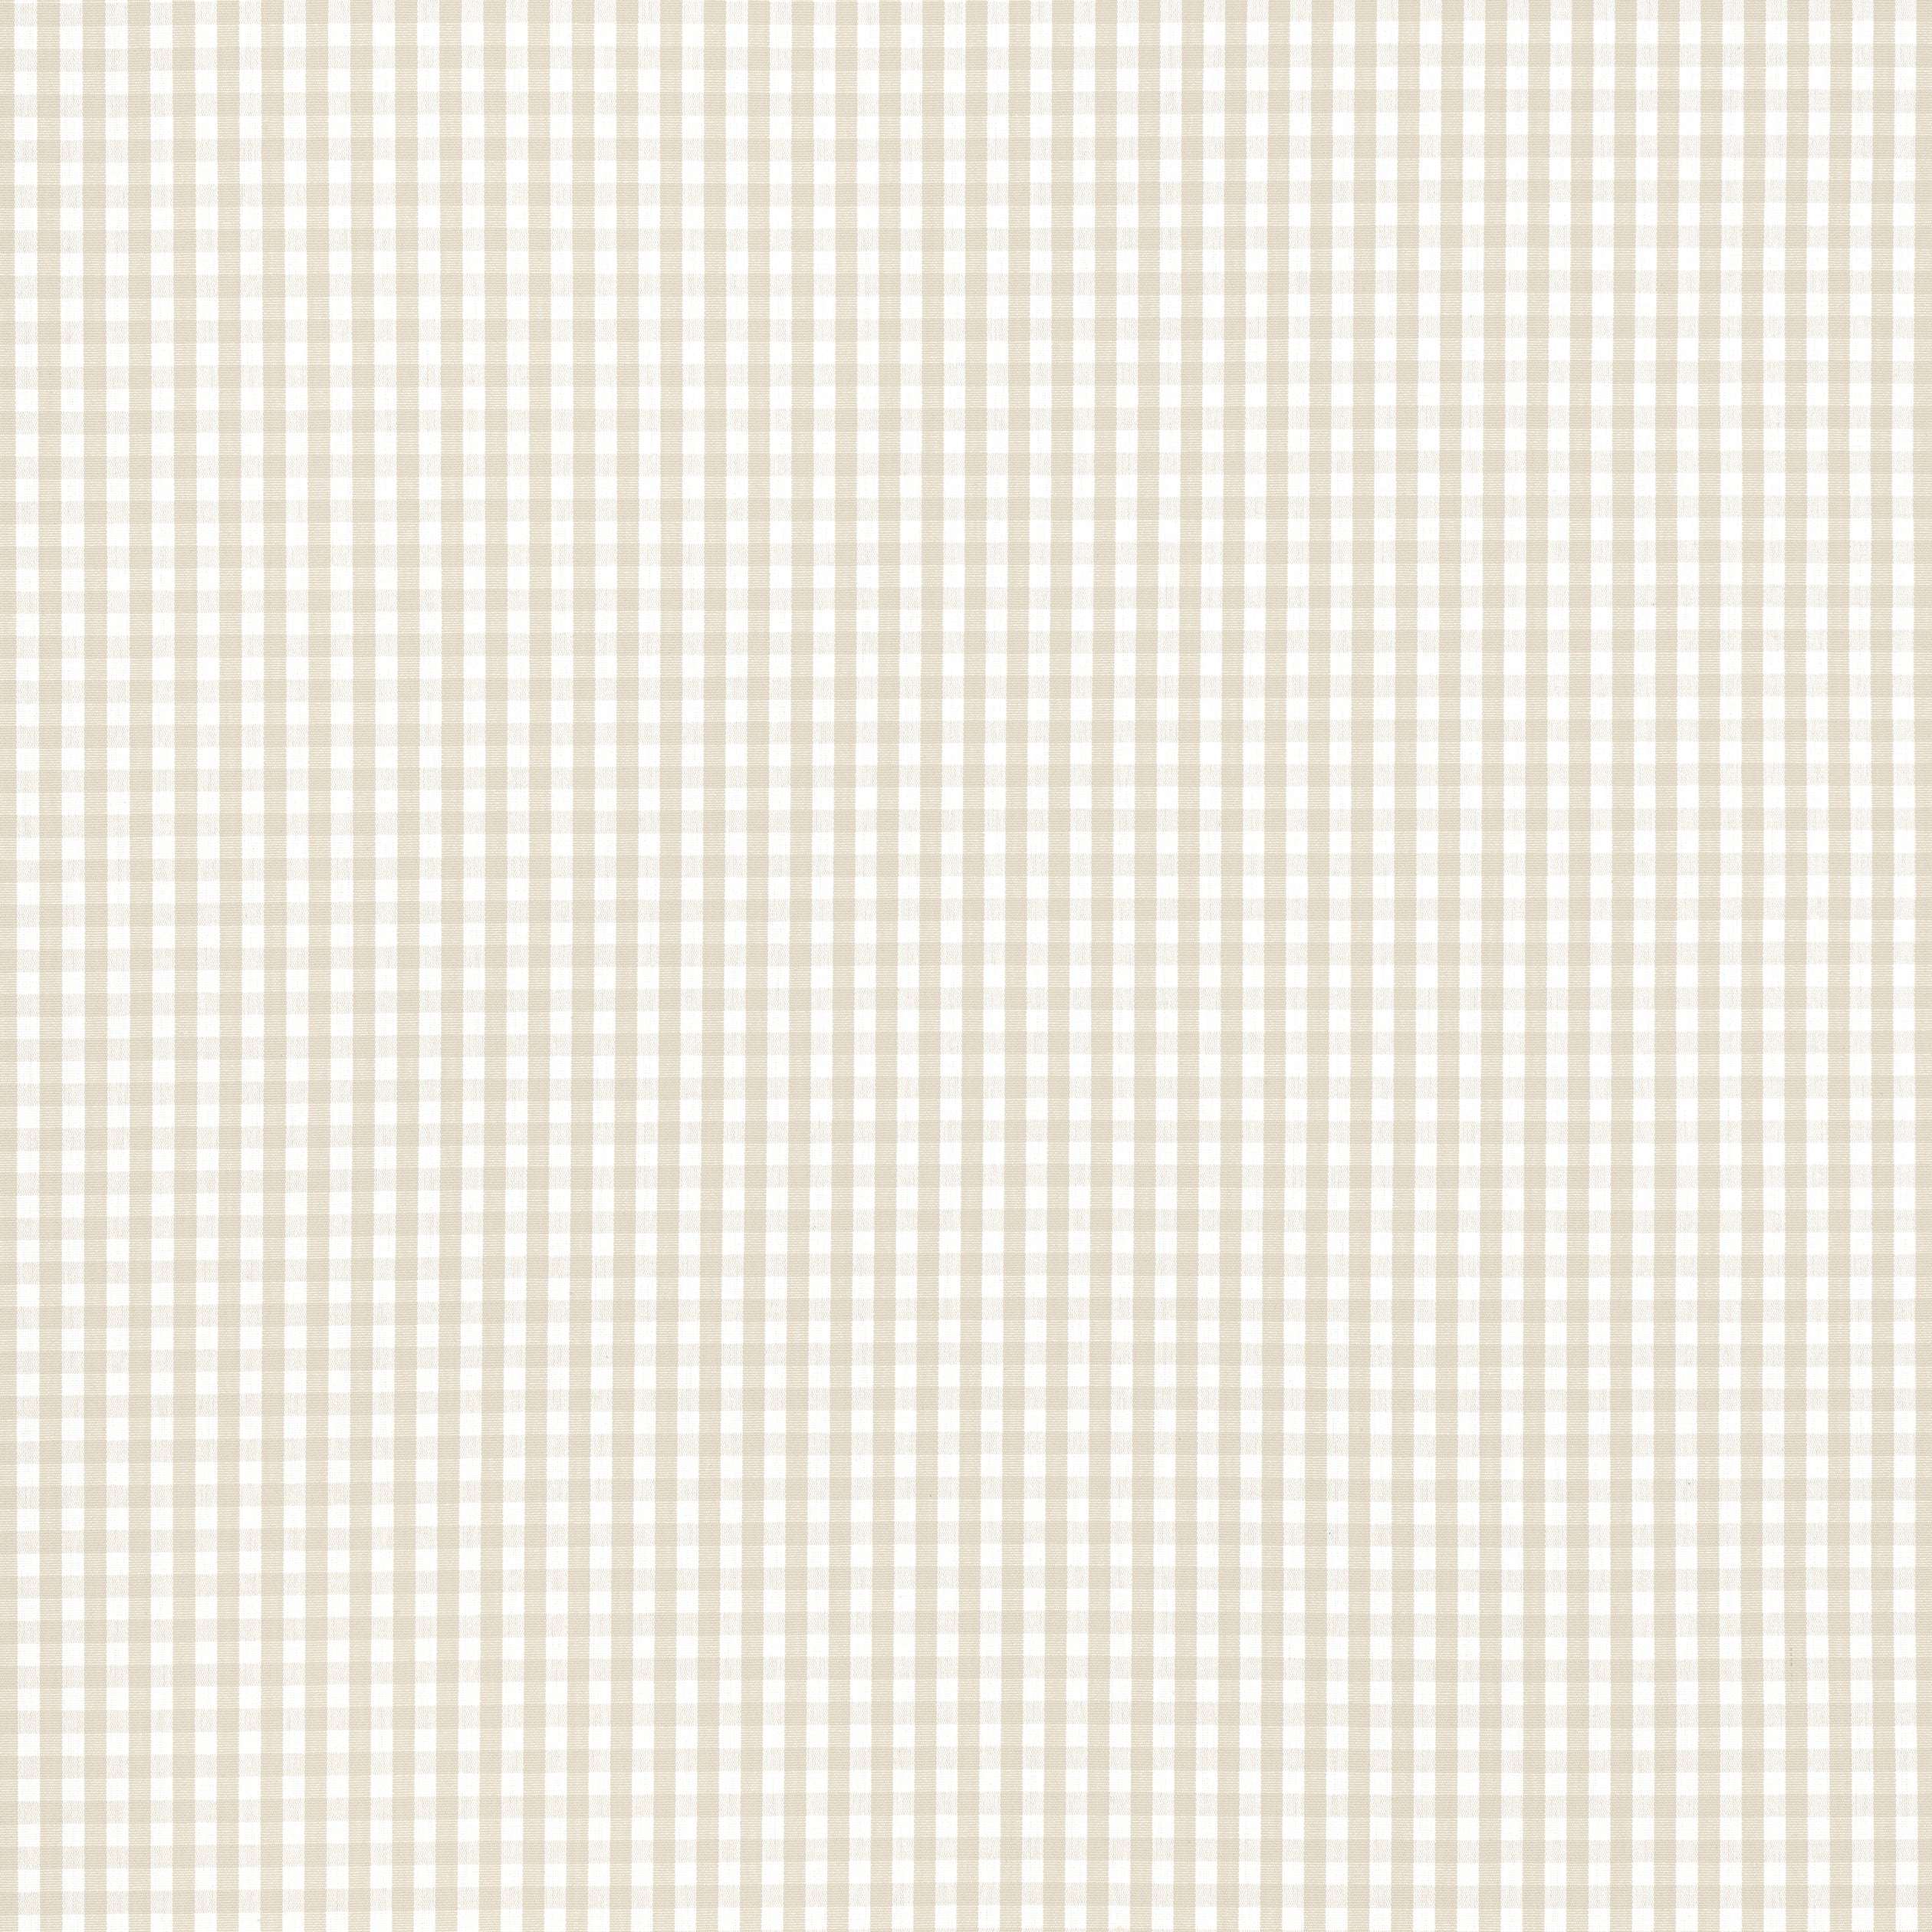 Leighton Check fabric in Beige color - pattern number AW24509 - by Anna French in the Devon collection